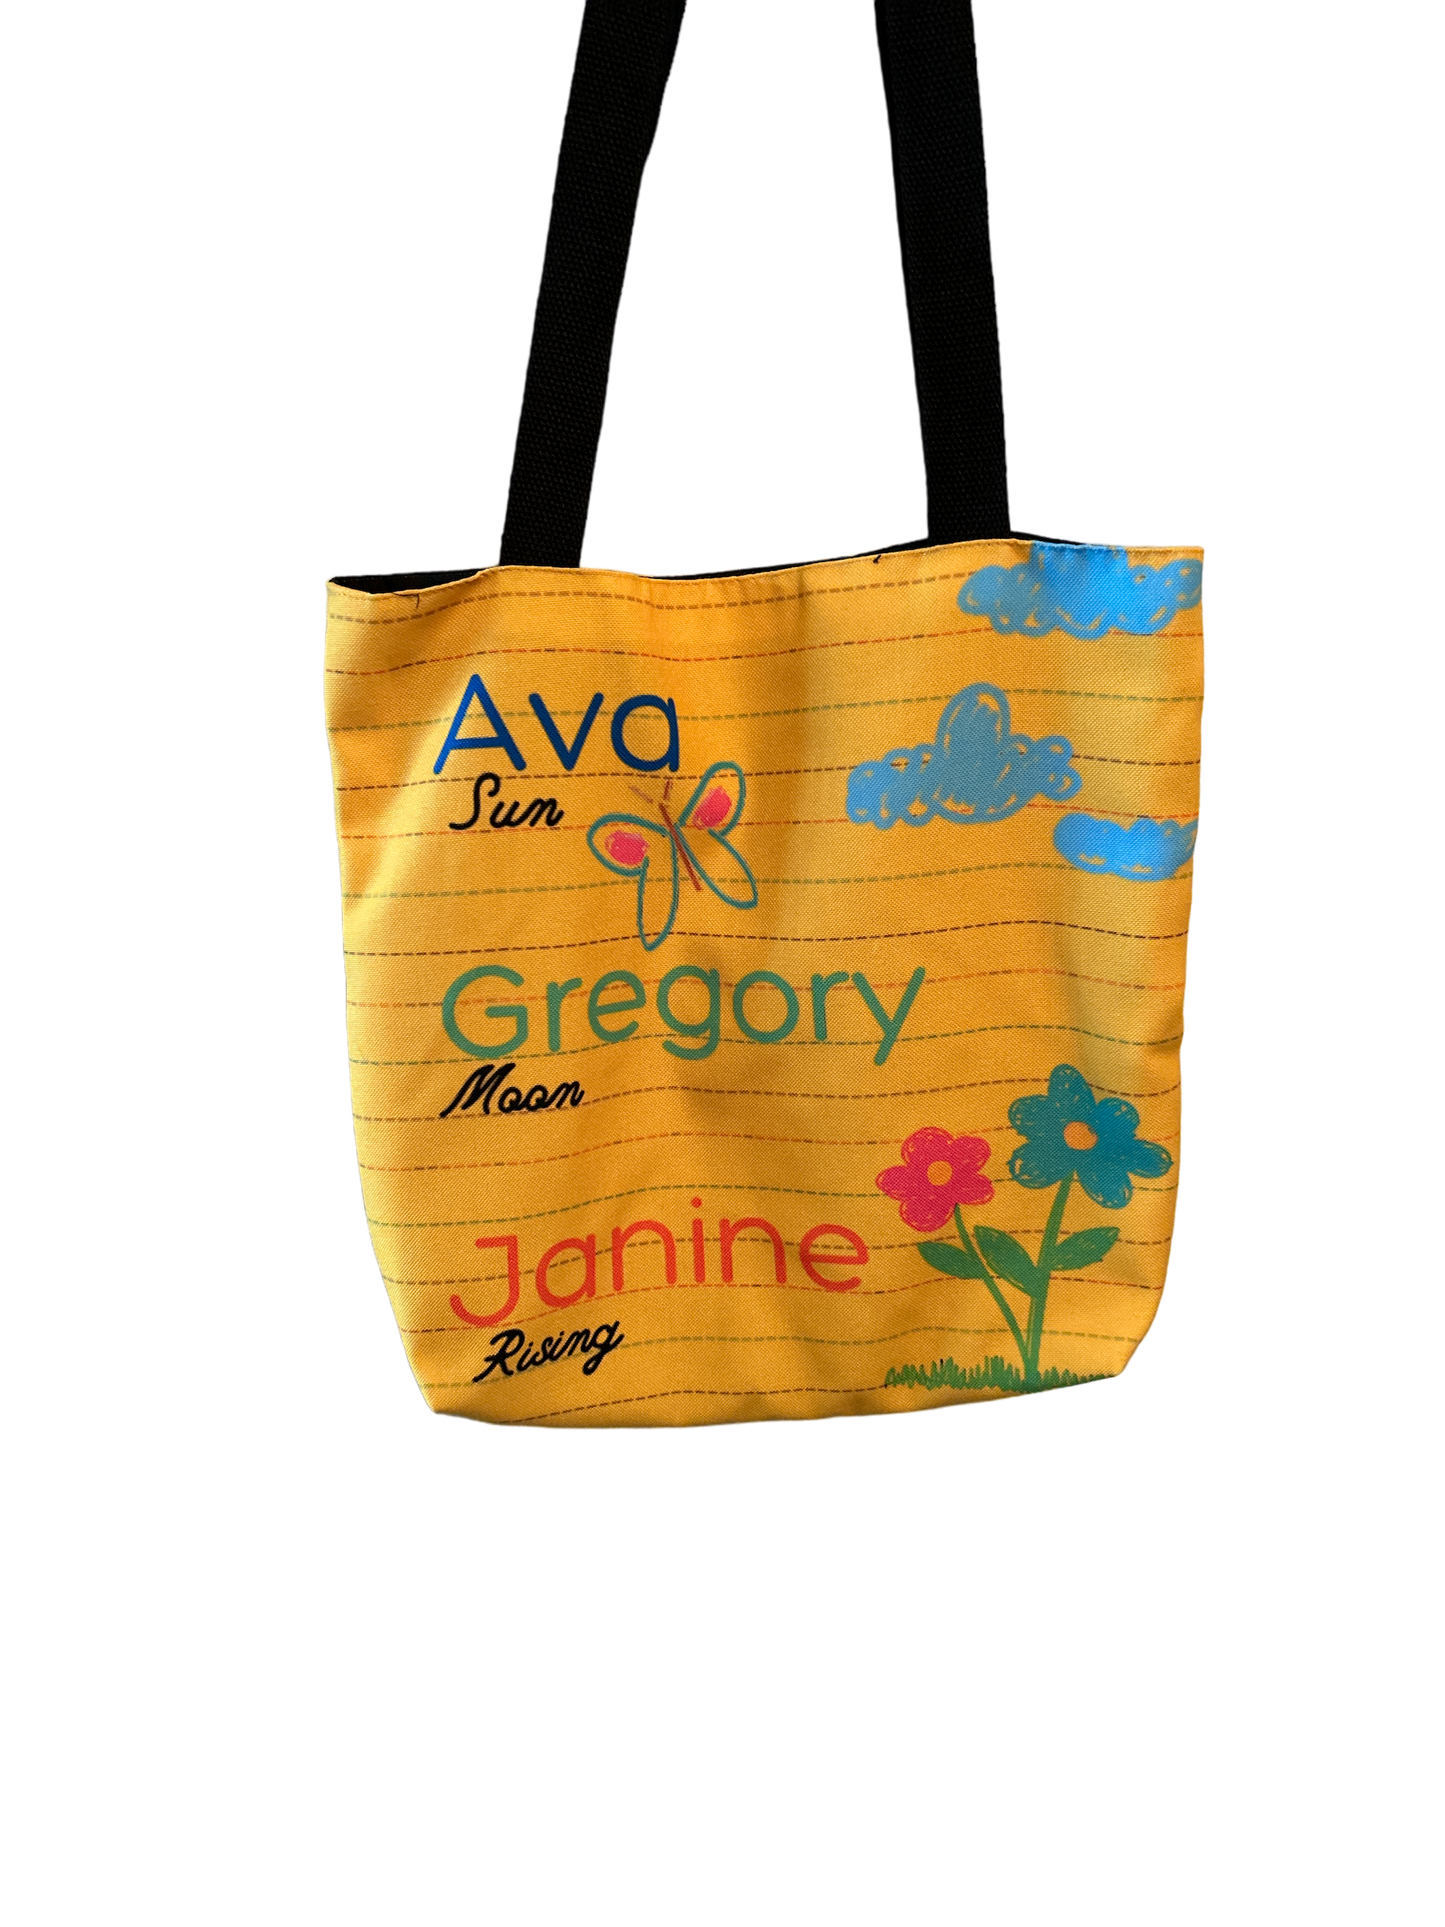 TvStrology Tote Bags